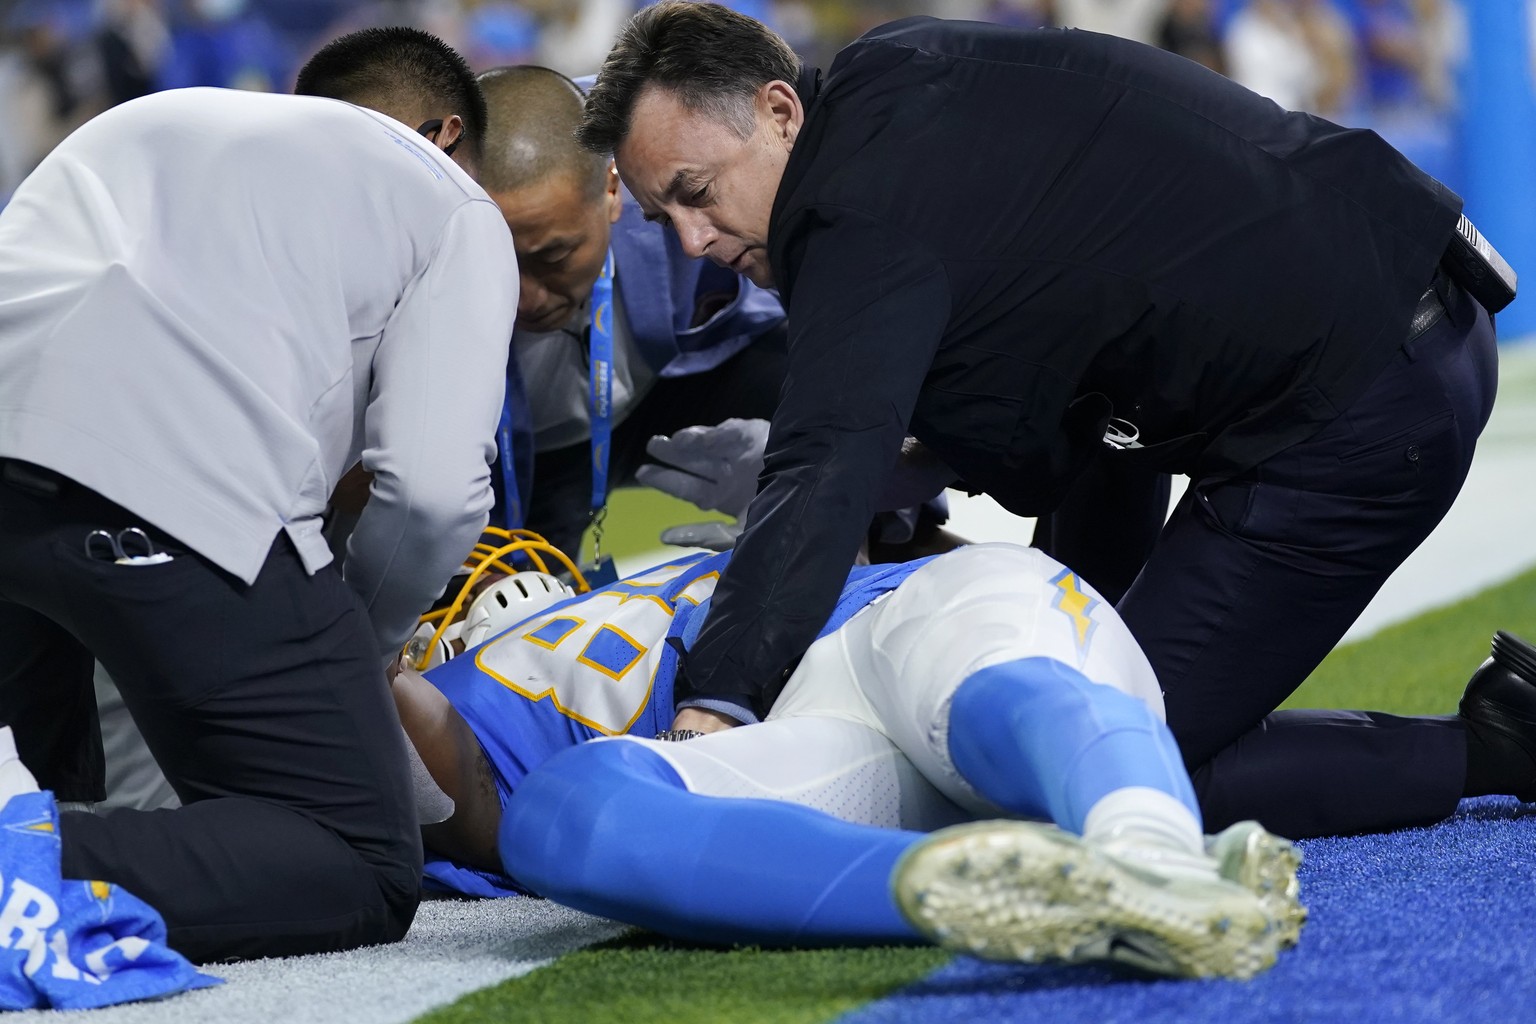 Team officials attend to Los Angeles Chargers tight end Donald Parham as he stays down after an injury during the first half of an NFL football game against the Kansas City Chiefs, Thursday, Dec. 16,  ...